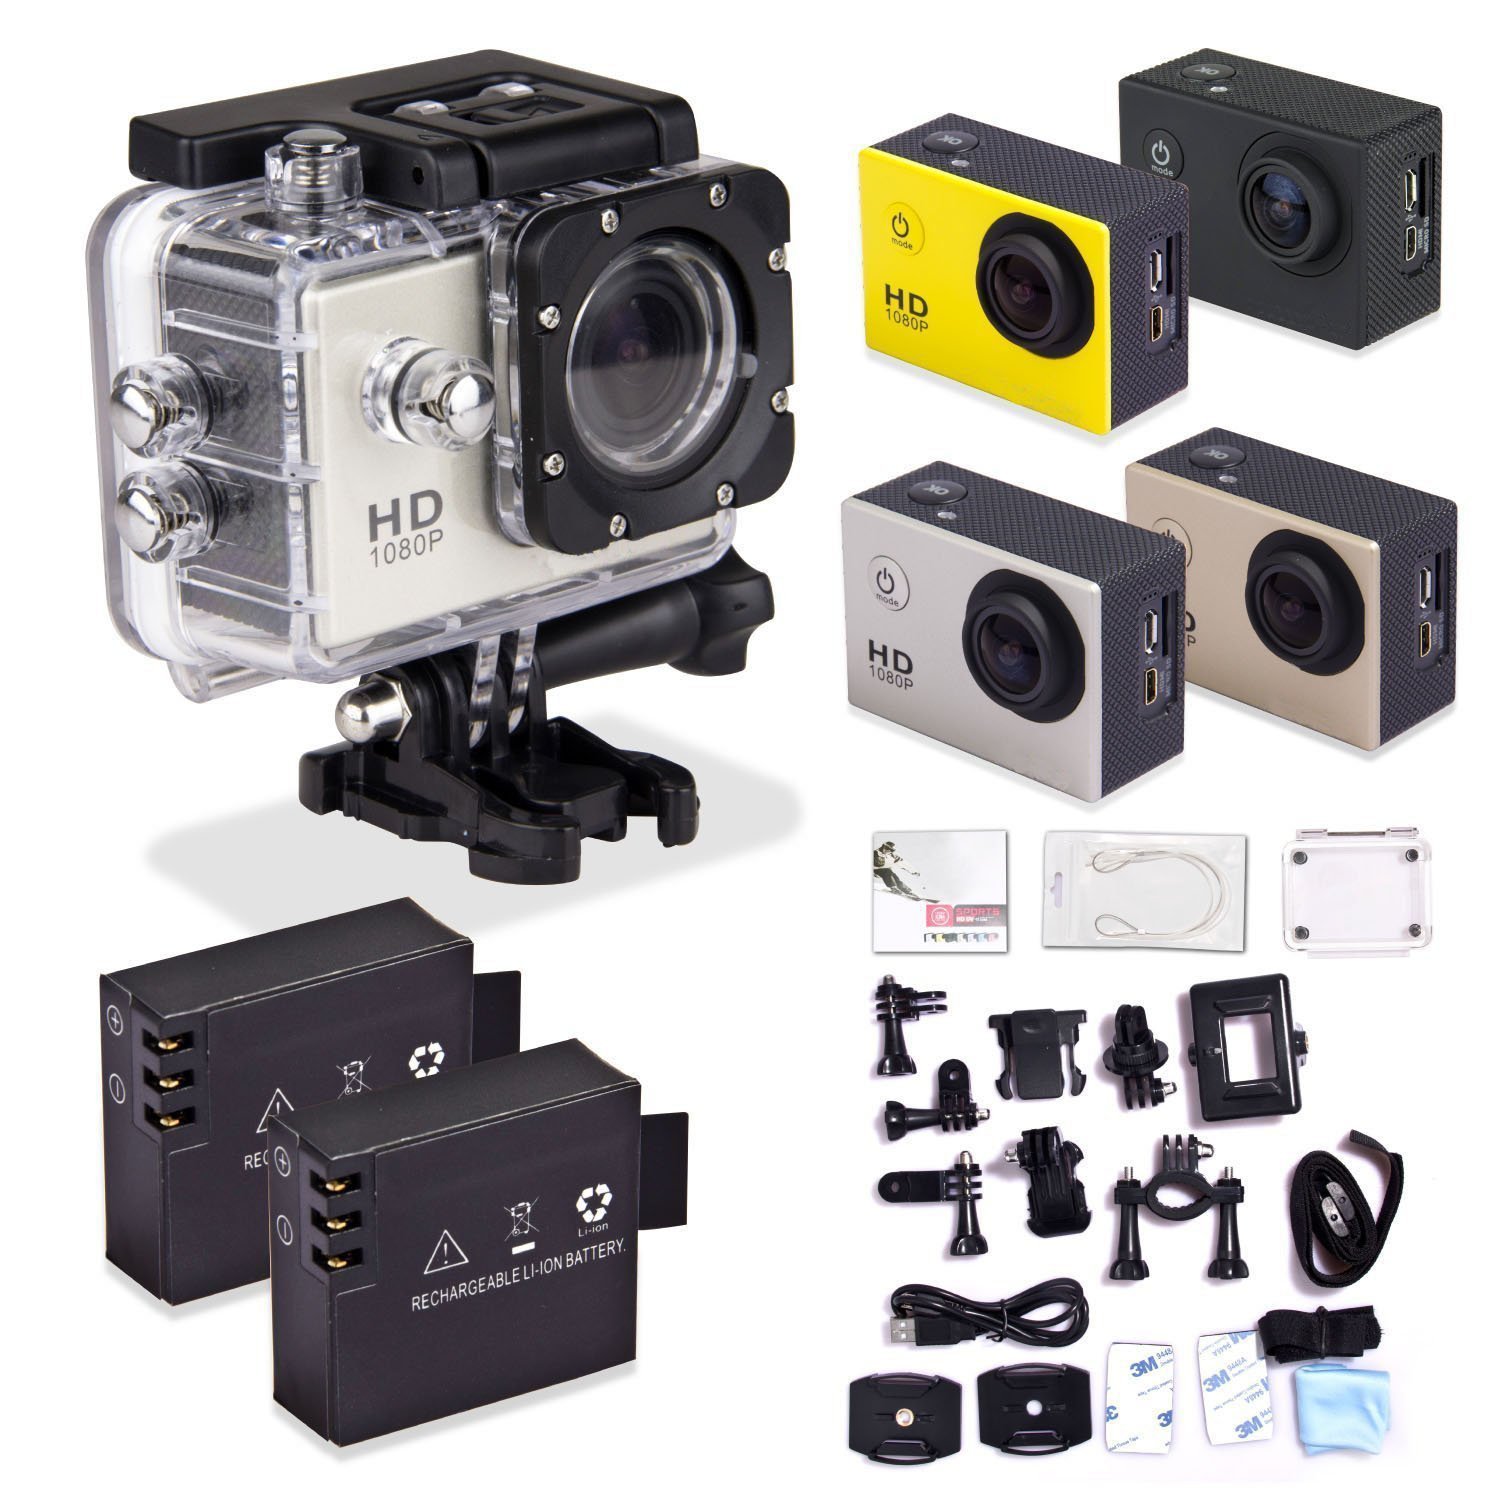 SJ4000 Action Sport Cam Camera 1080P 30fps H.264 1.5 Inch 170 Degree Wide Angle